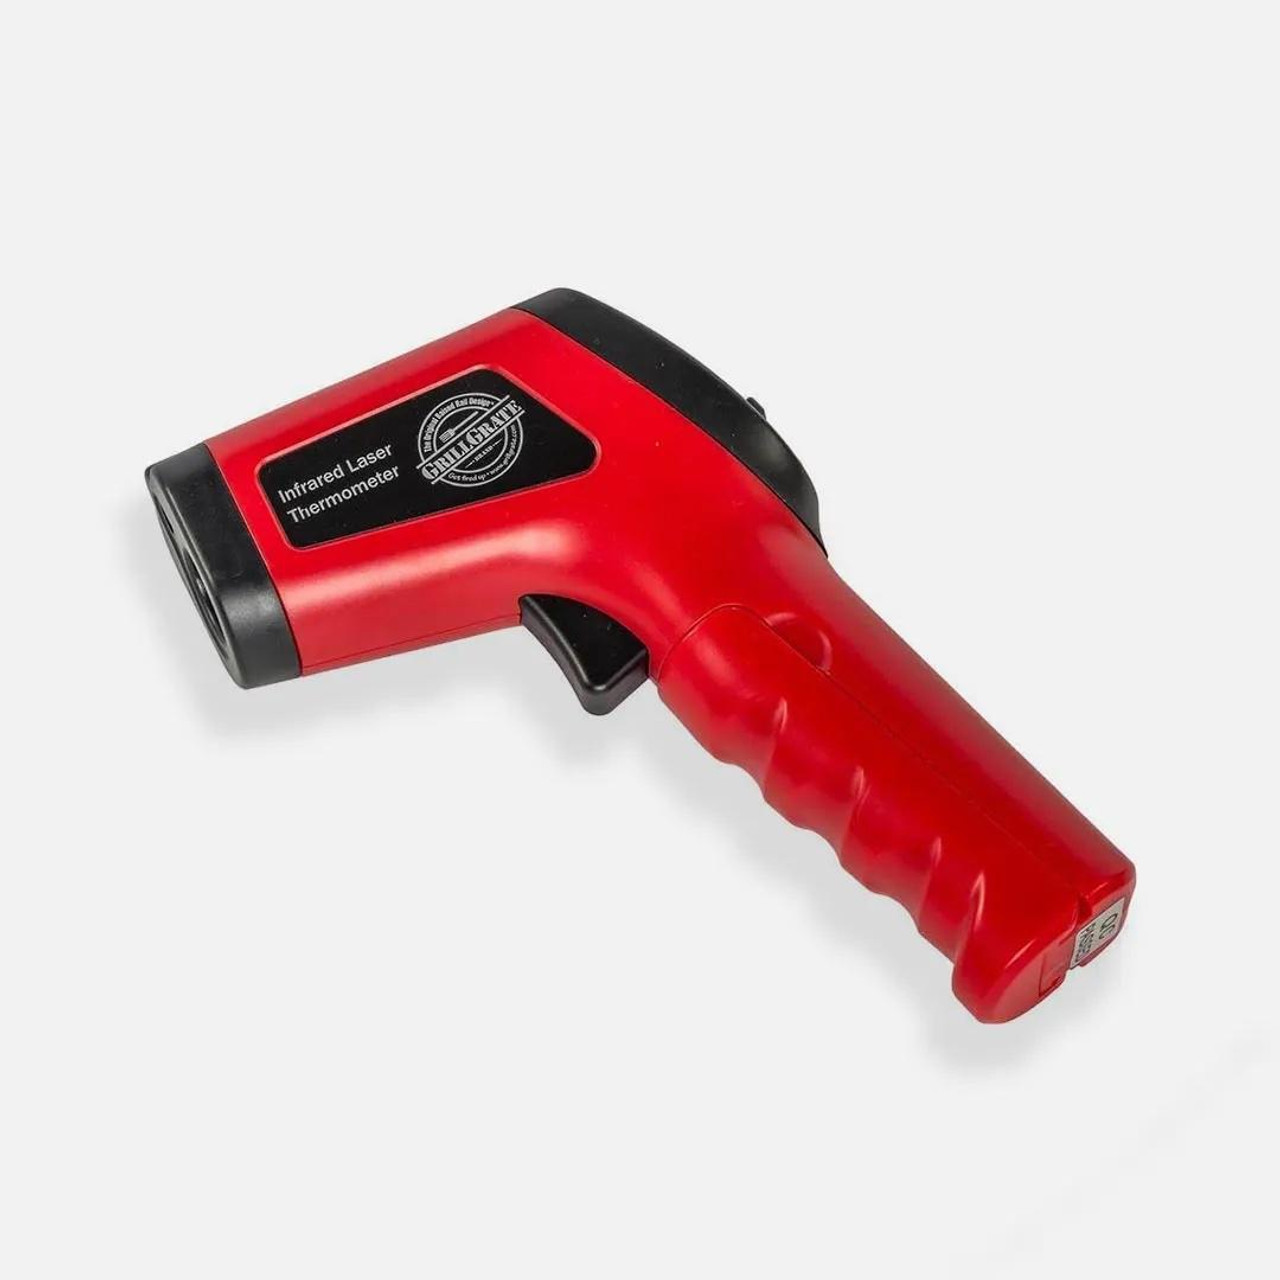 How to Use an Infrared Thermometer Gun for Grilling?